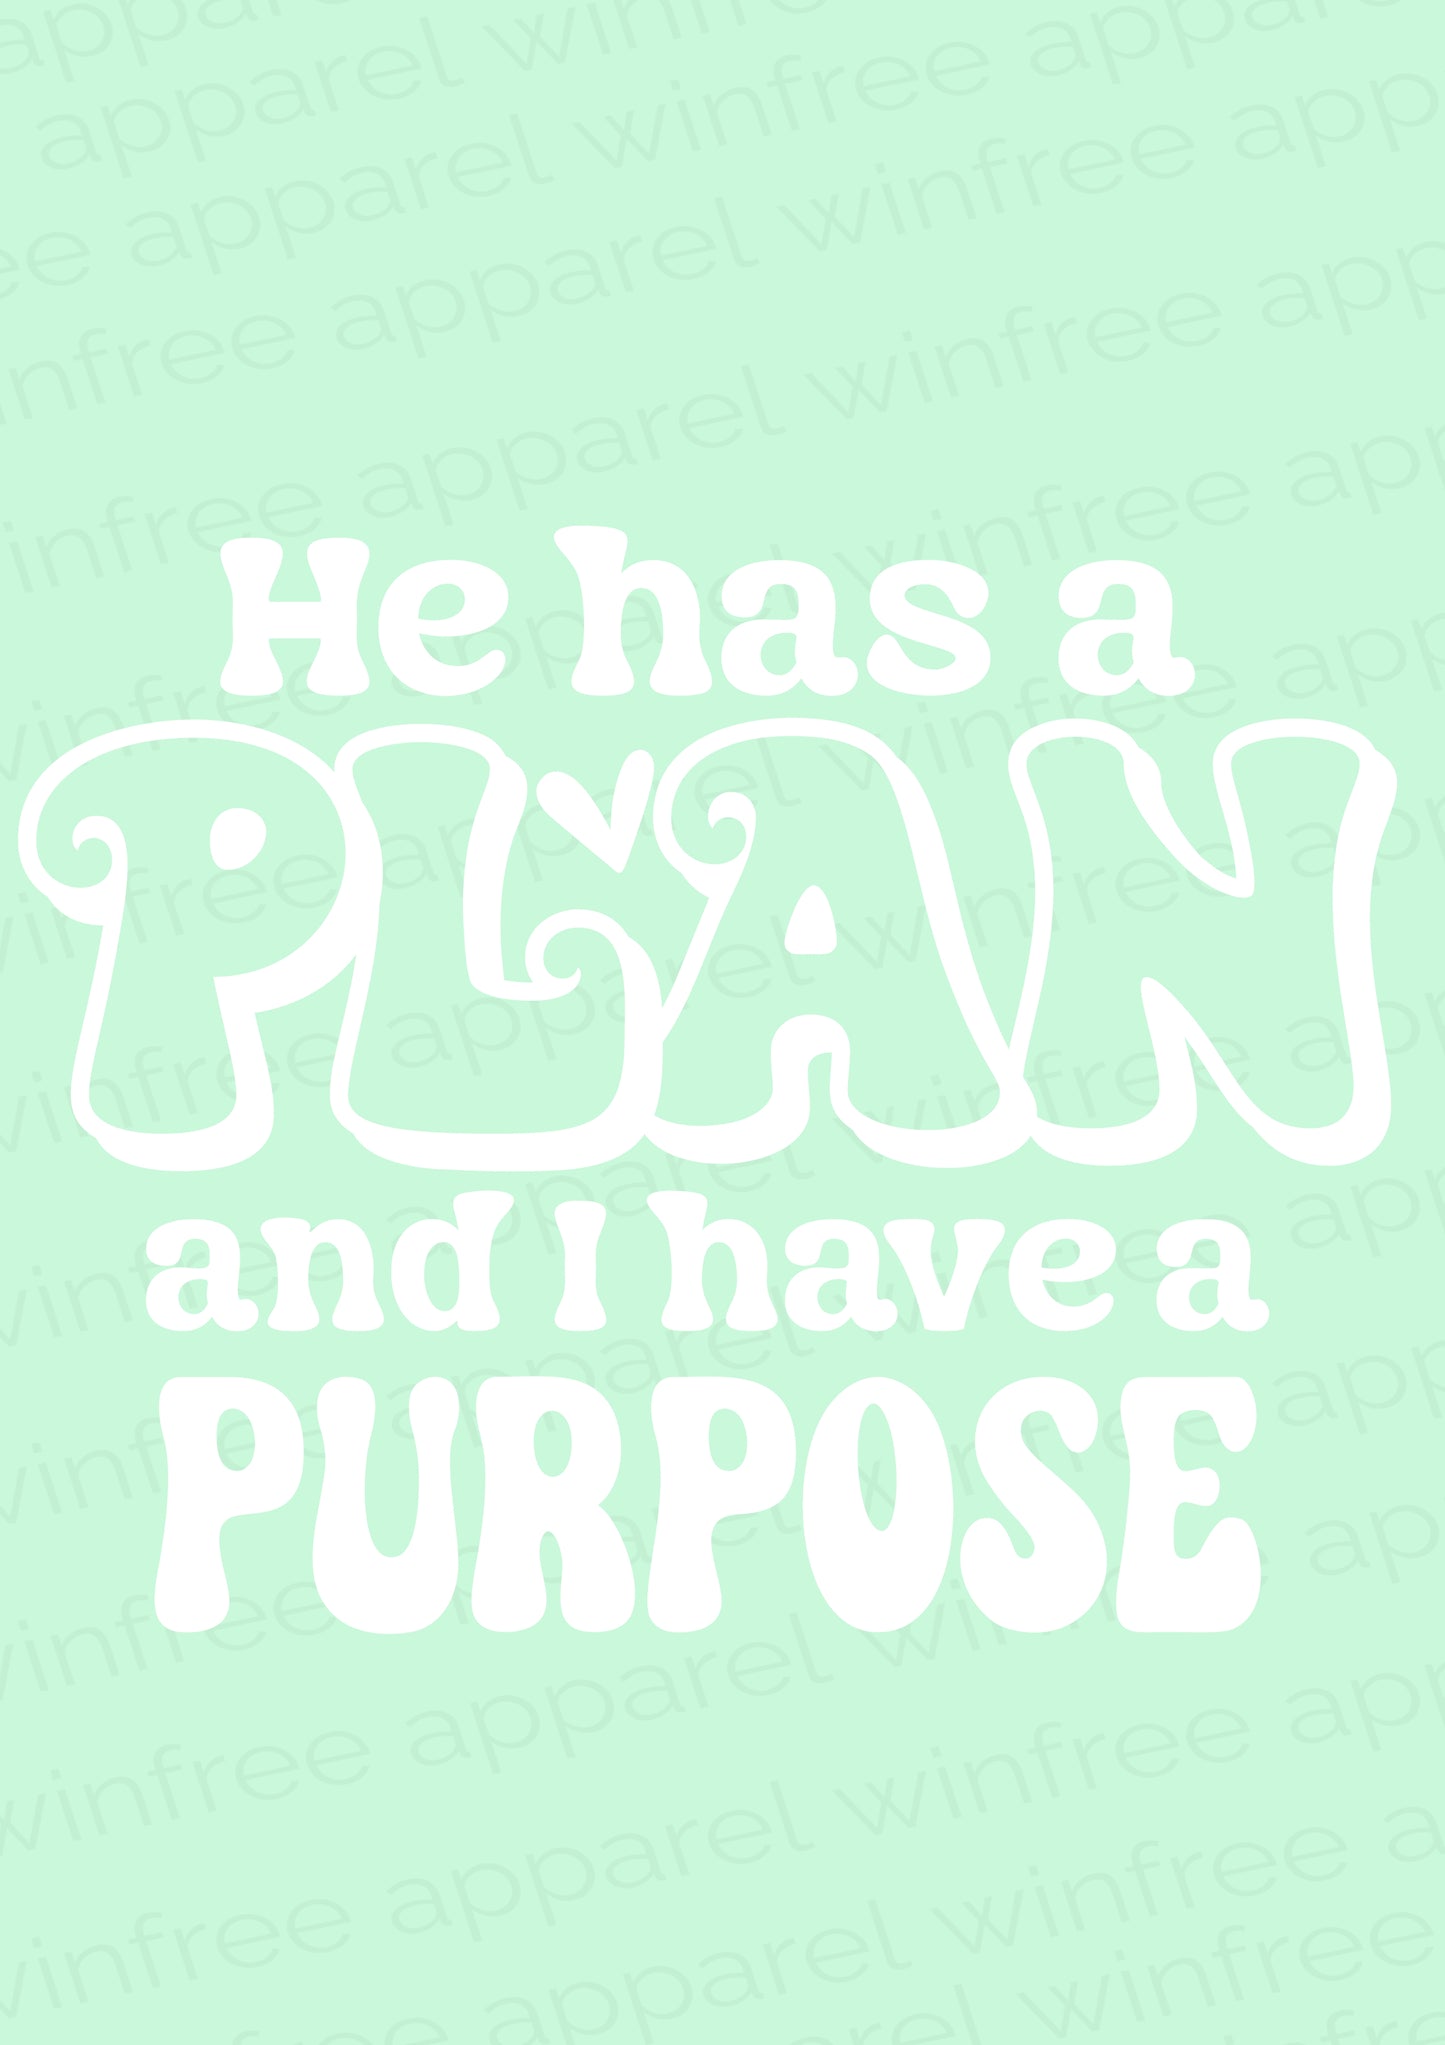 He Has A Plan and I Have a Purpose